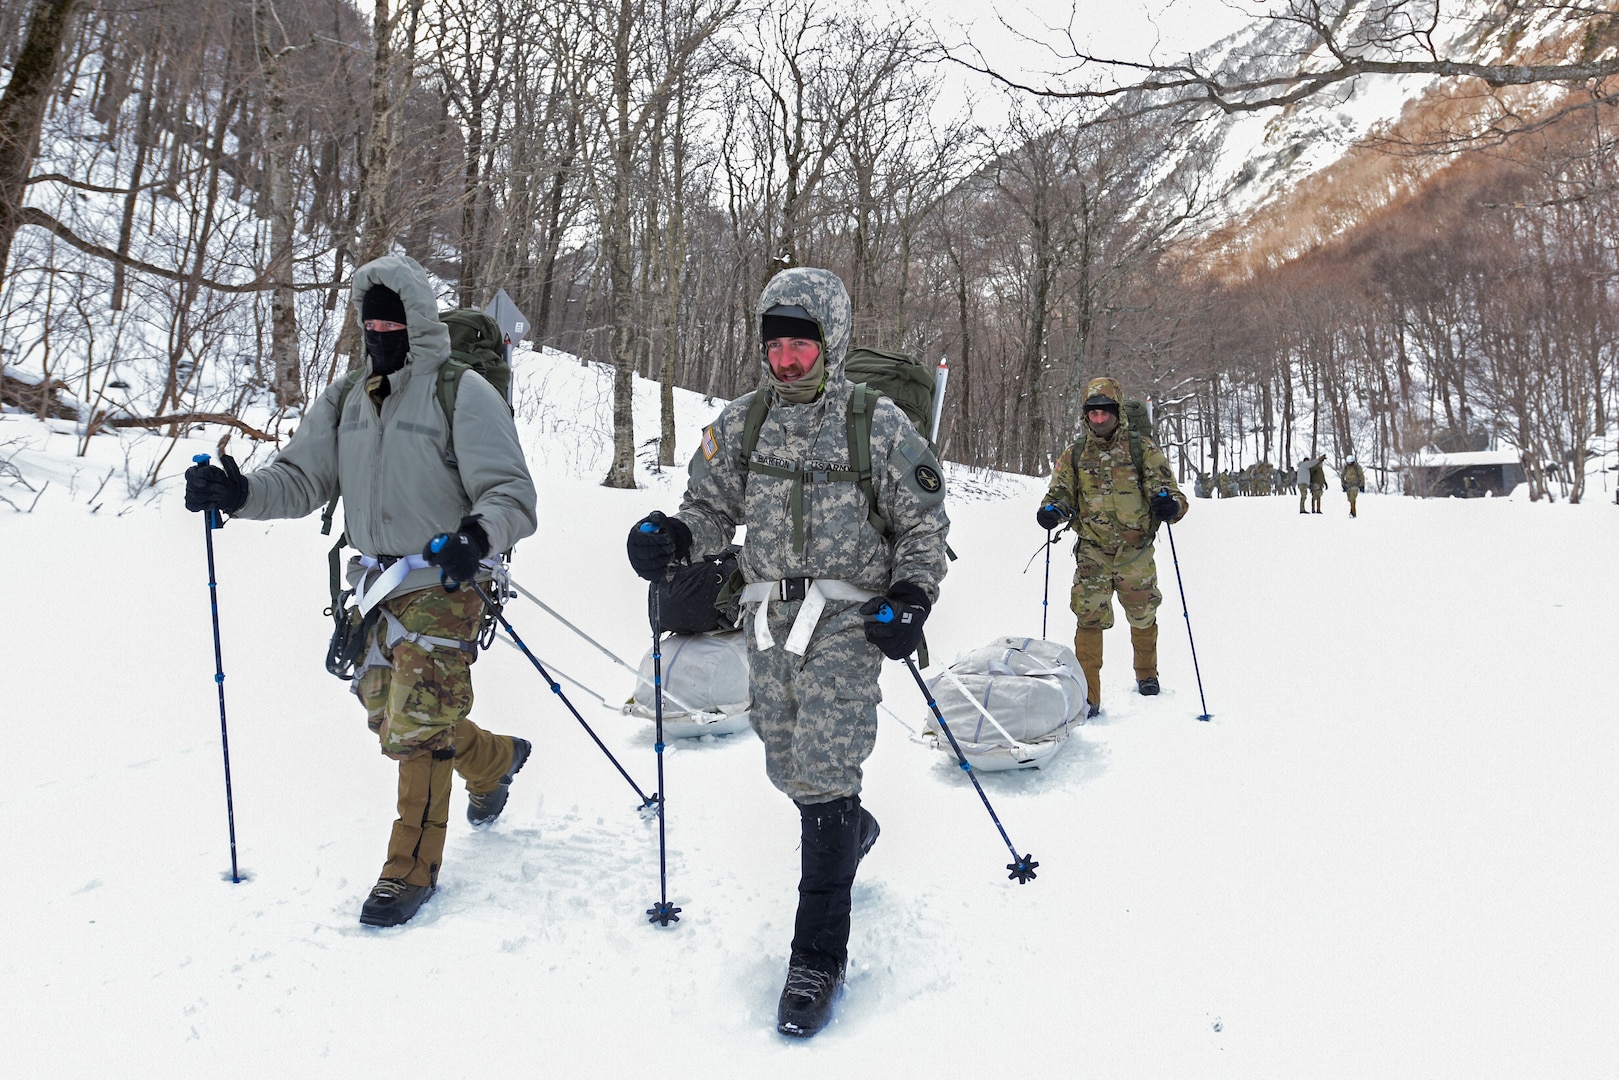 Students at the U.S. Army Mountain Warfare School’s Advanced Military Mountaineer Course in Jericho, Vermont, drag mountaineering equipment on sleds as they leave the site where they camped in temperatures that plunged to -29 degrees with windchill Jan. 27, 2022.